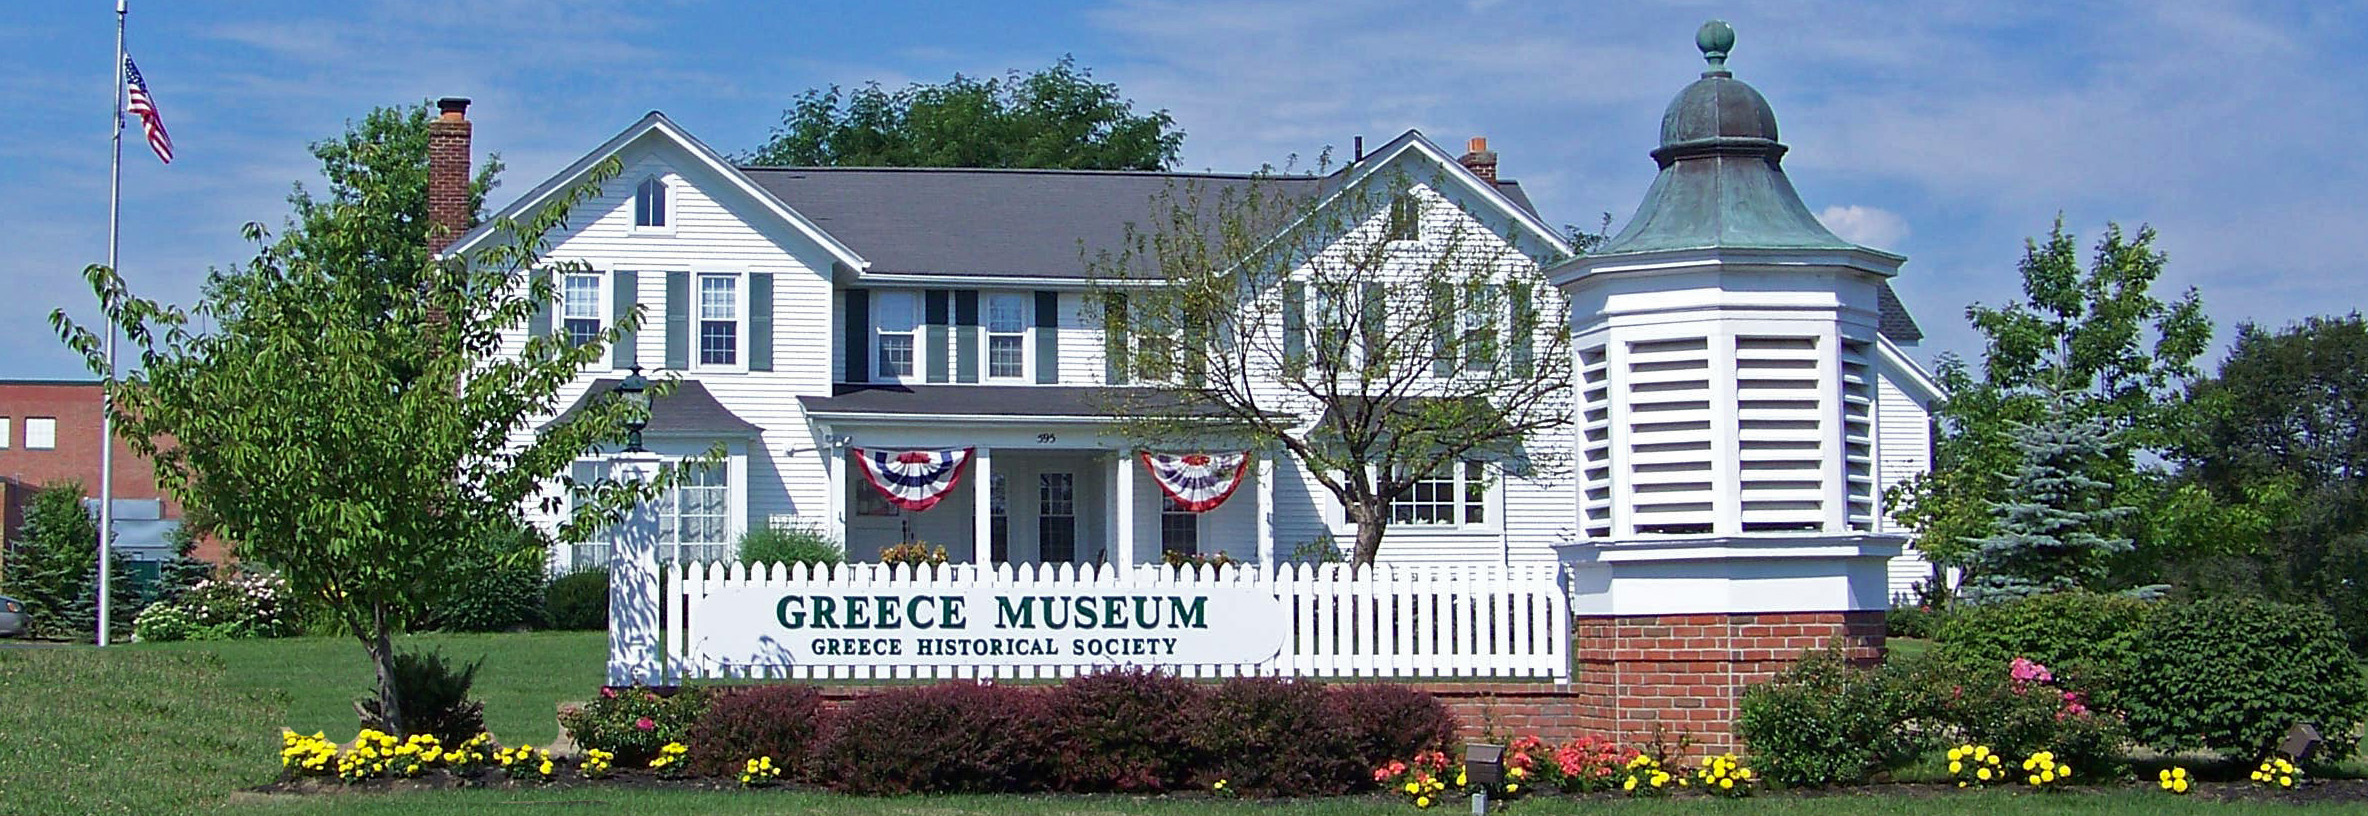 Greece Historical Society & Museum